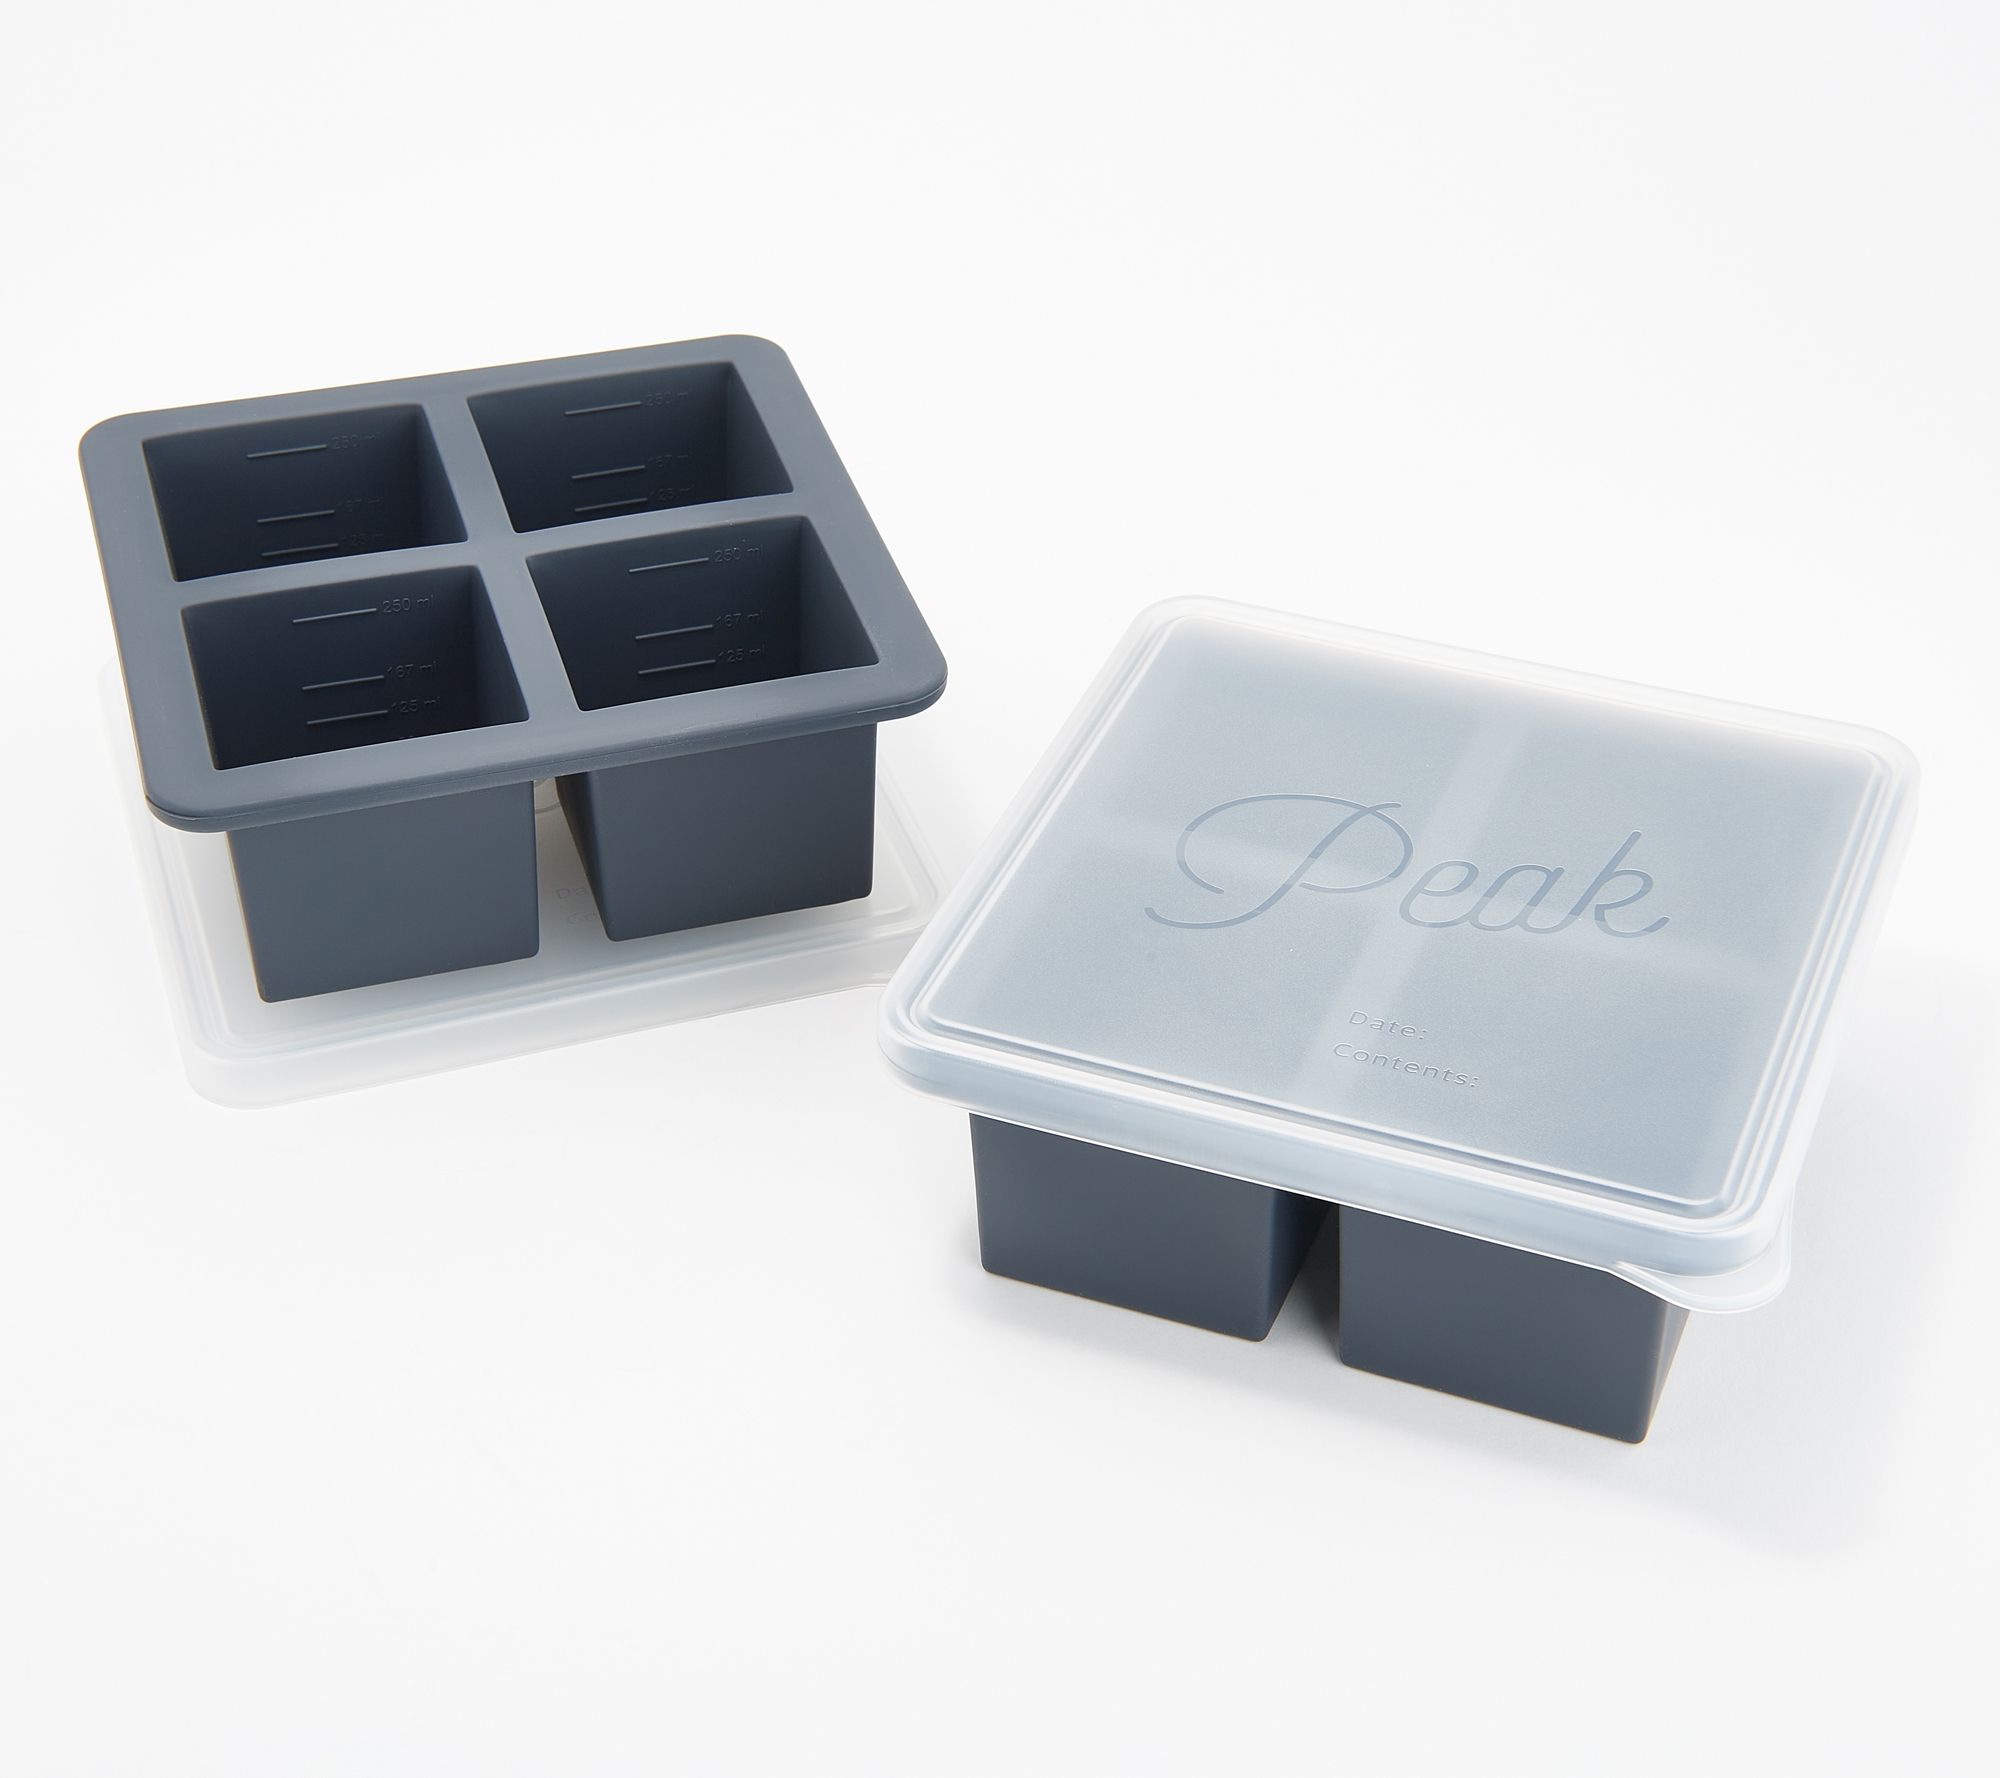 Silicone Square Ice Cube Tray with Lid - Just Smart Kitchenware